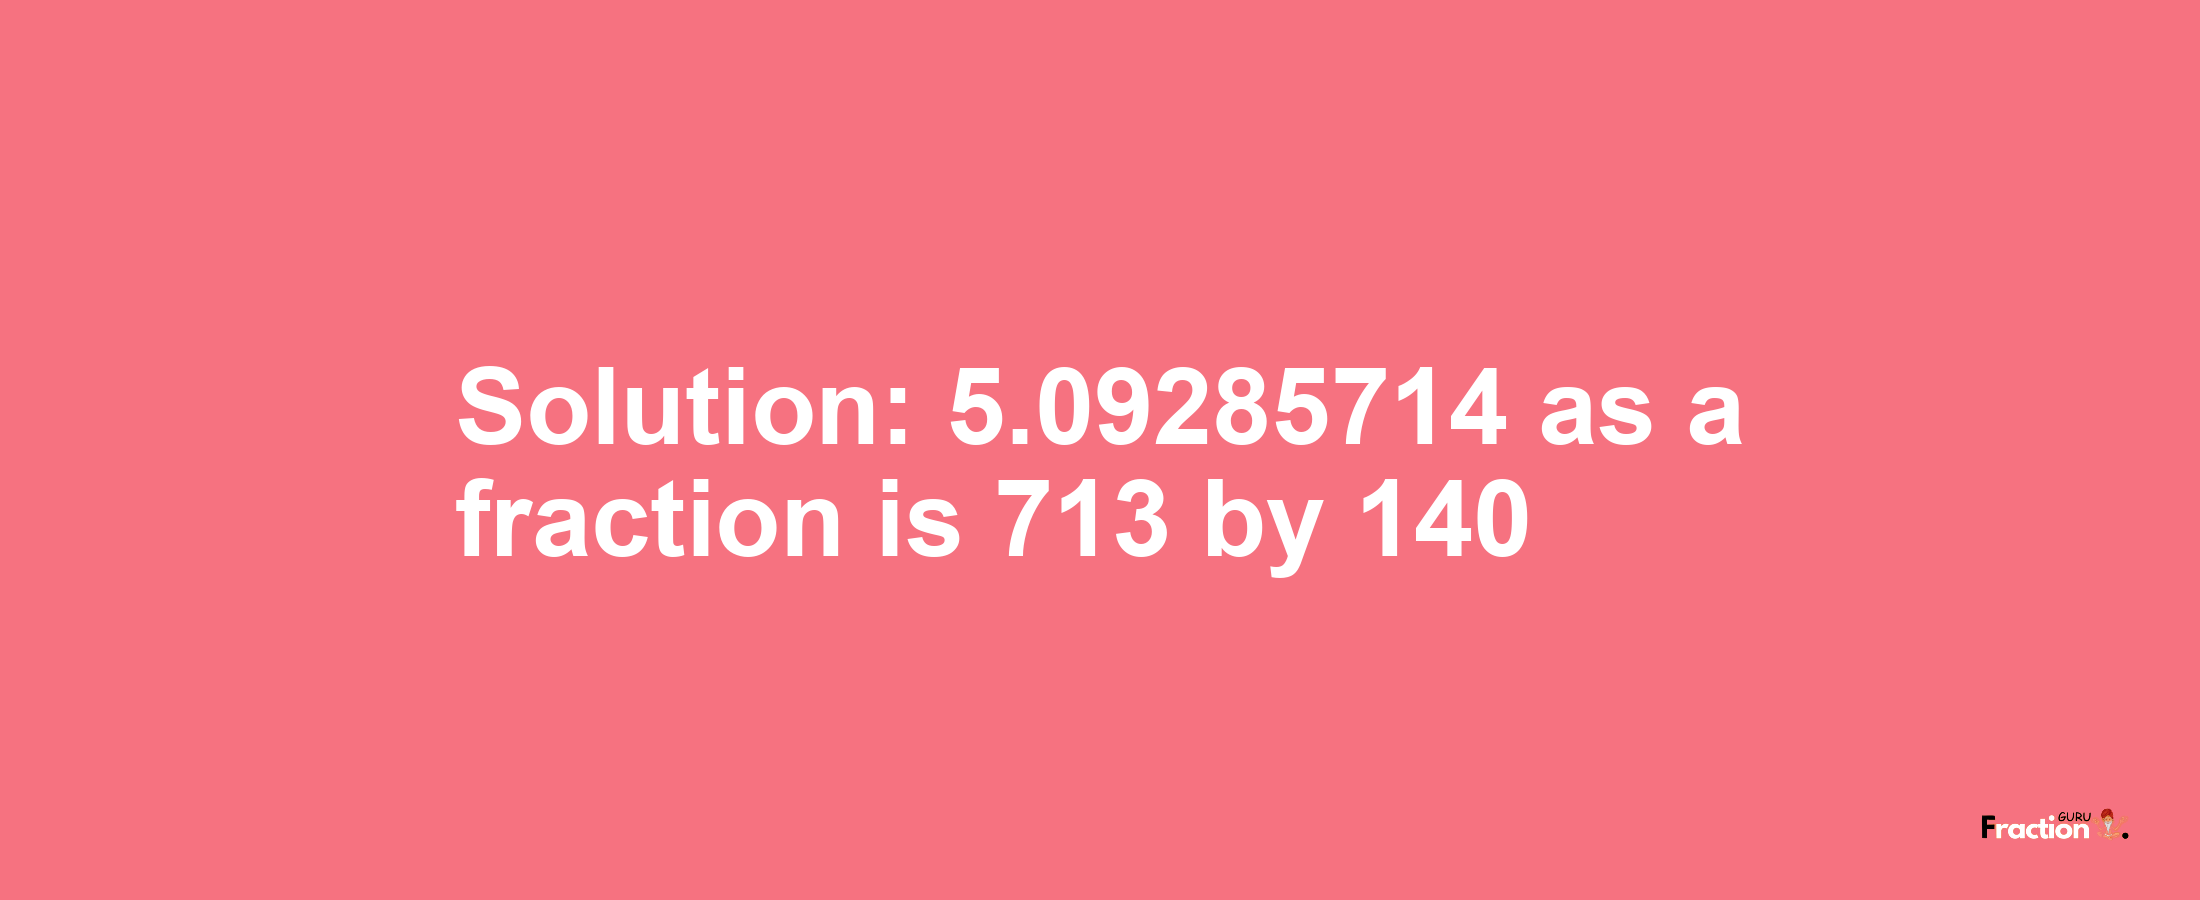 Solution:5.09285714 as a fraction is 713/140